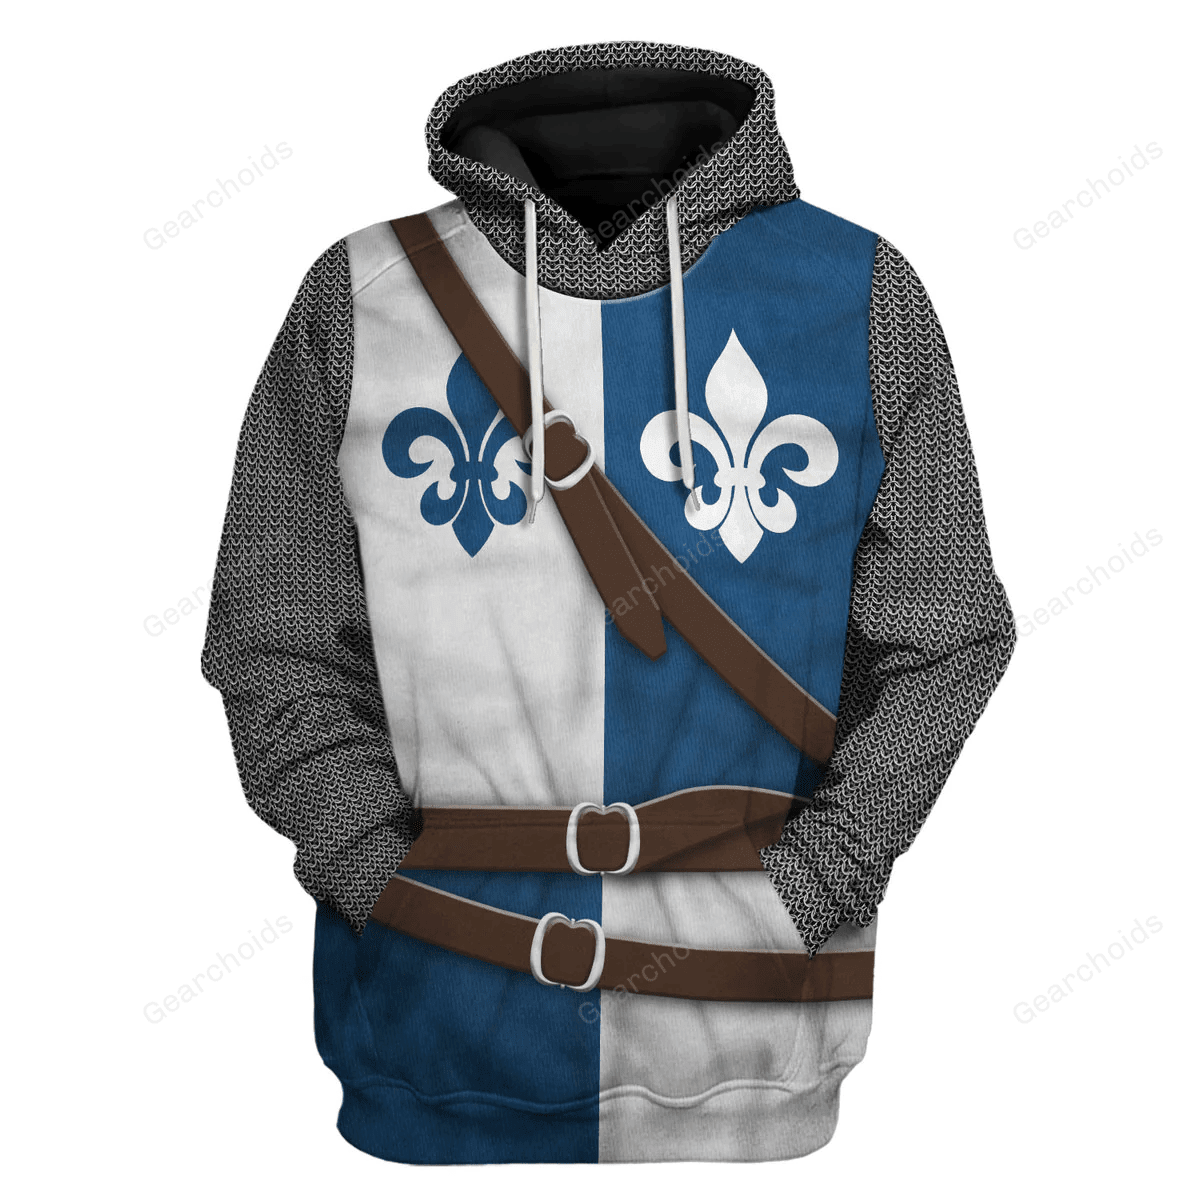 Gearchoids 12th Century French Knight Costume Hoodie Sweatshirt T-Shirt Tracksuit